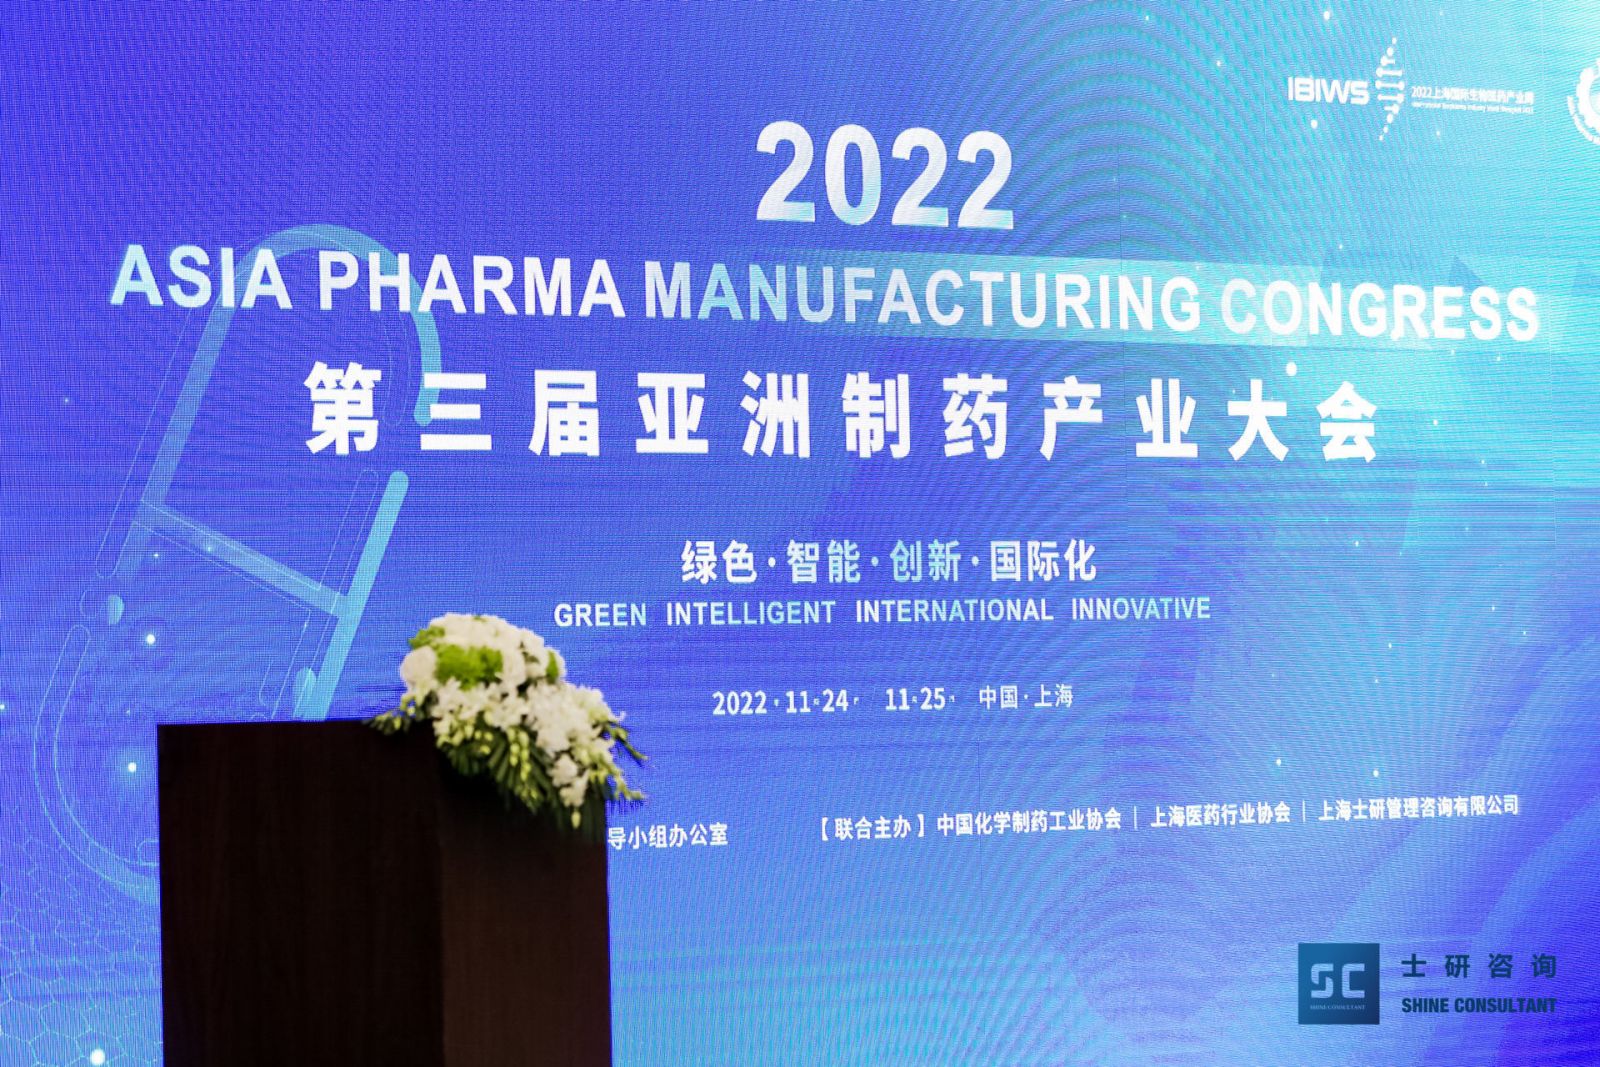 Company Events | 2022 3rd Asian Pharma Manufacturing Congress was Successfully Held in Shanghai